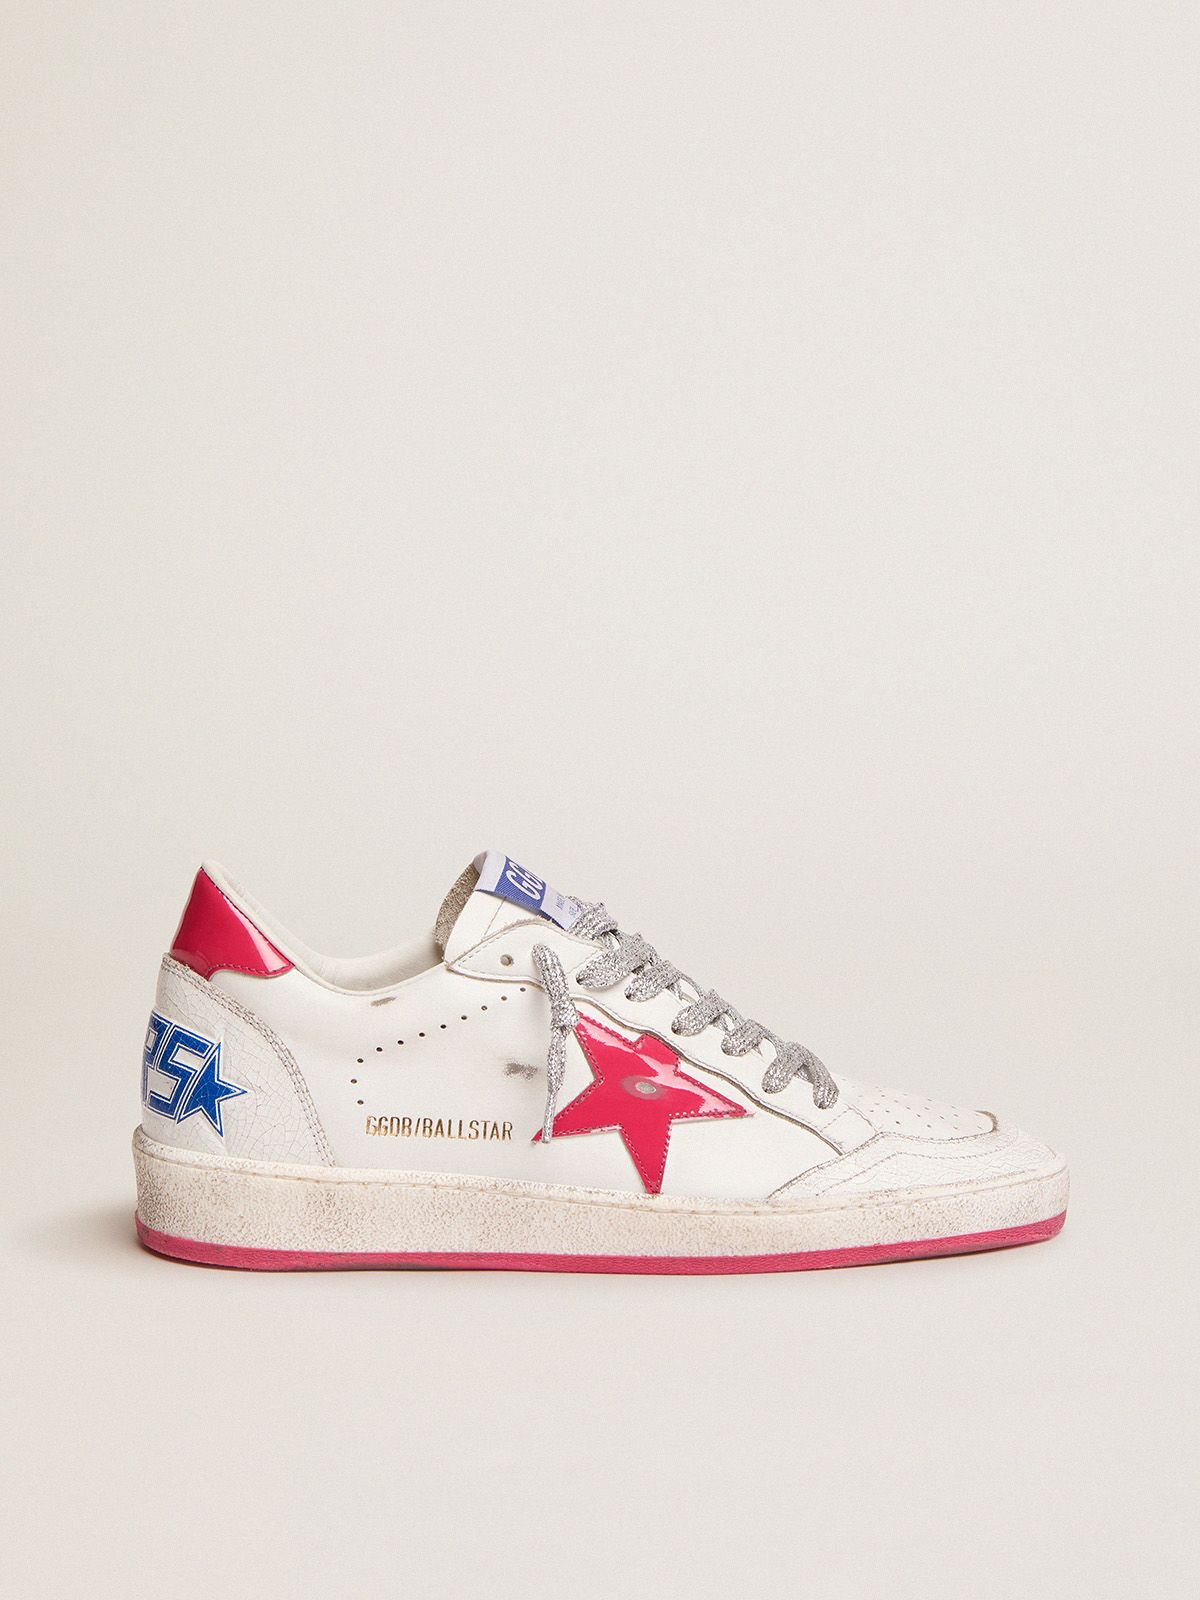 Ball Star LTD sneakers in white leather with red patent leather detail | 